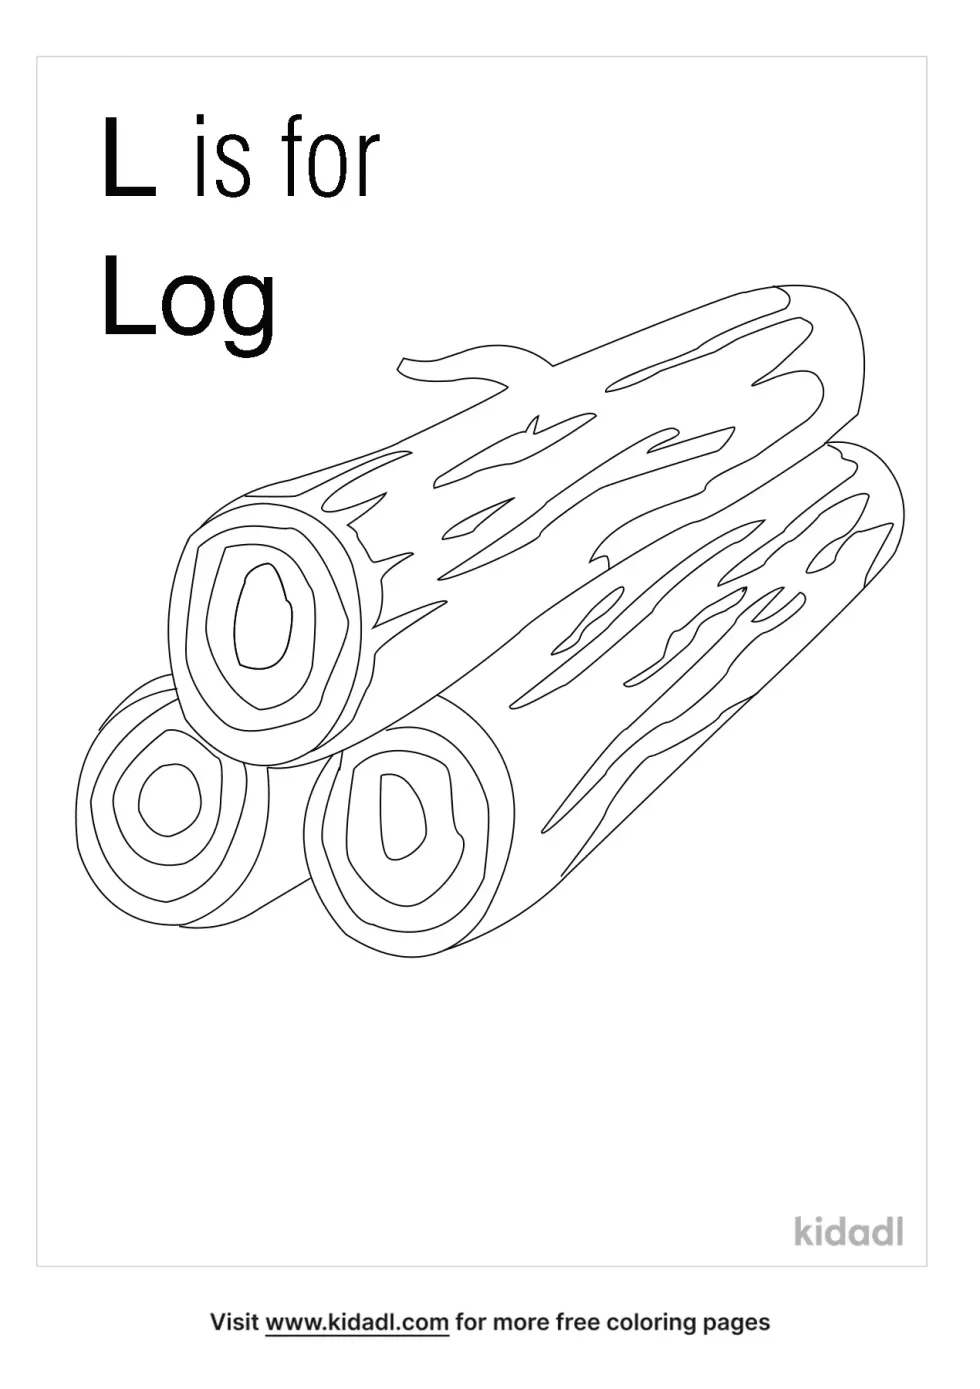 L Is For Log Coloring Page